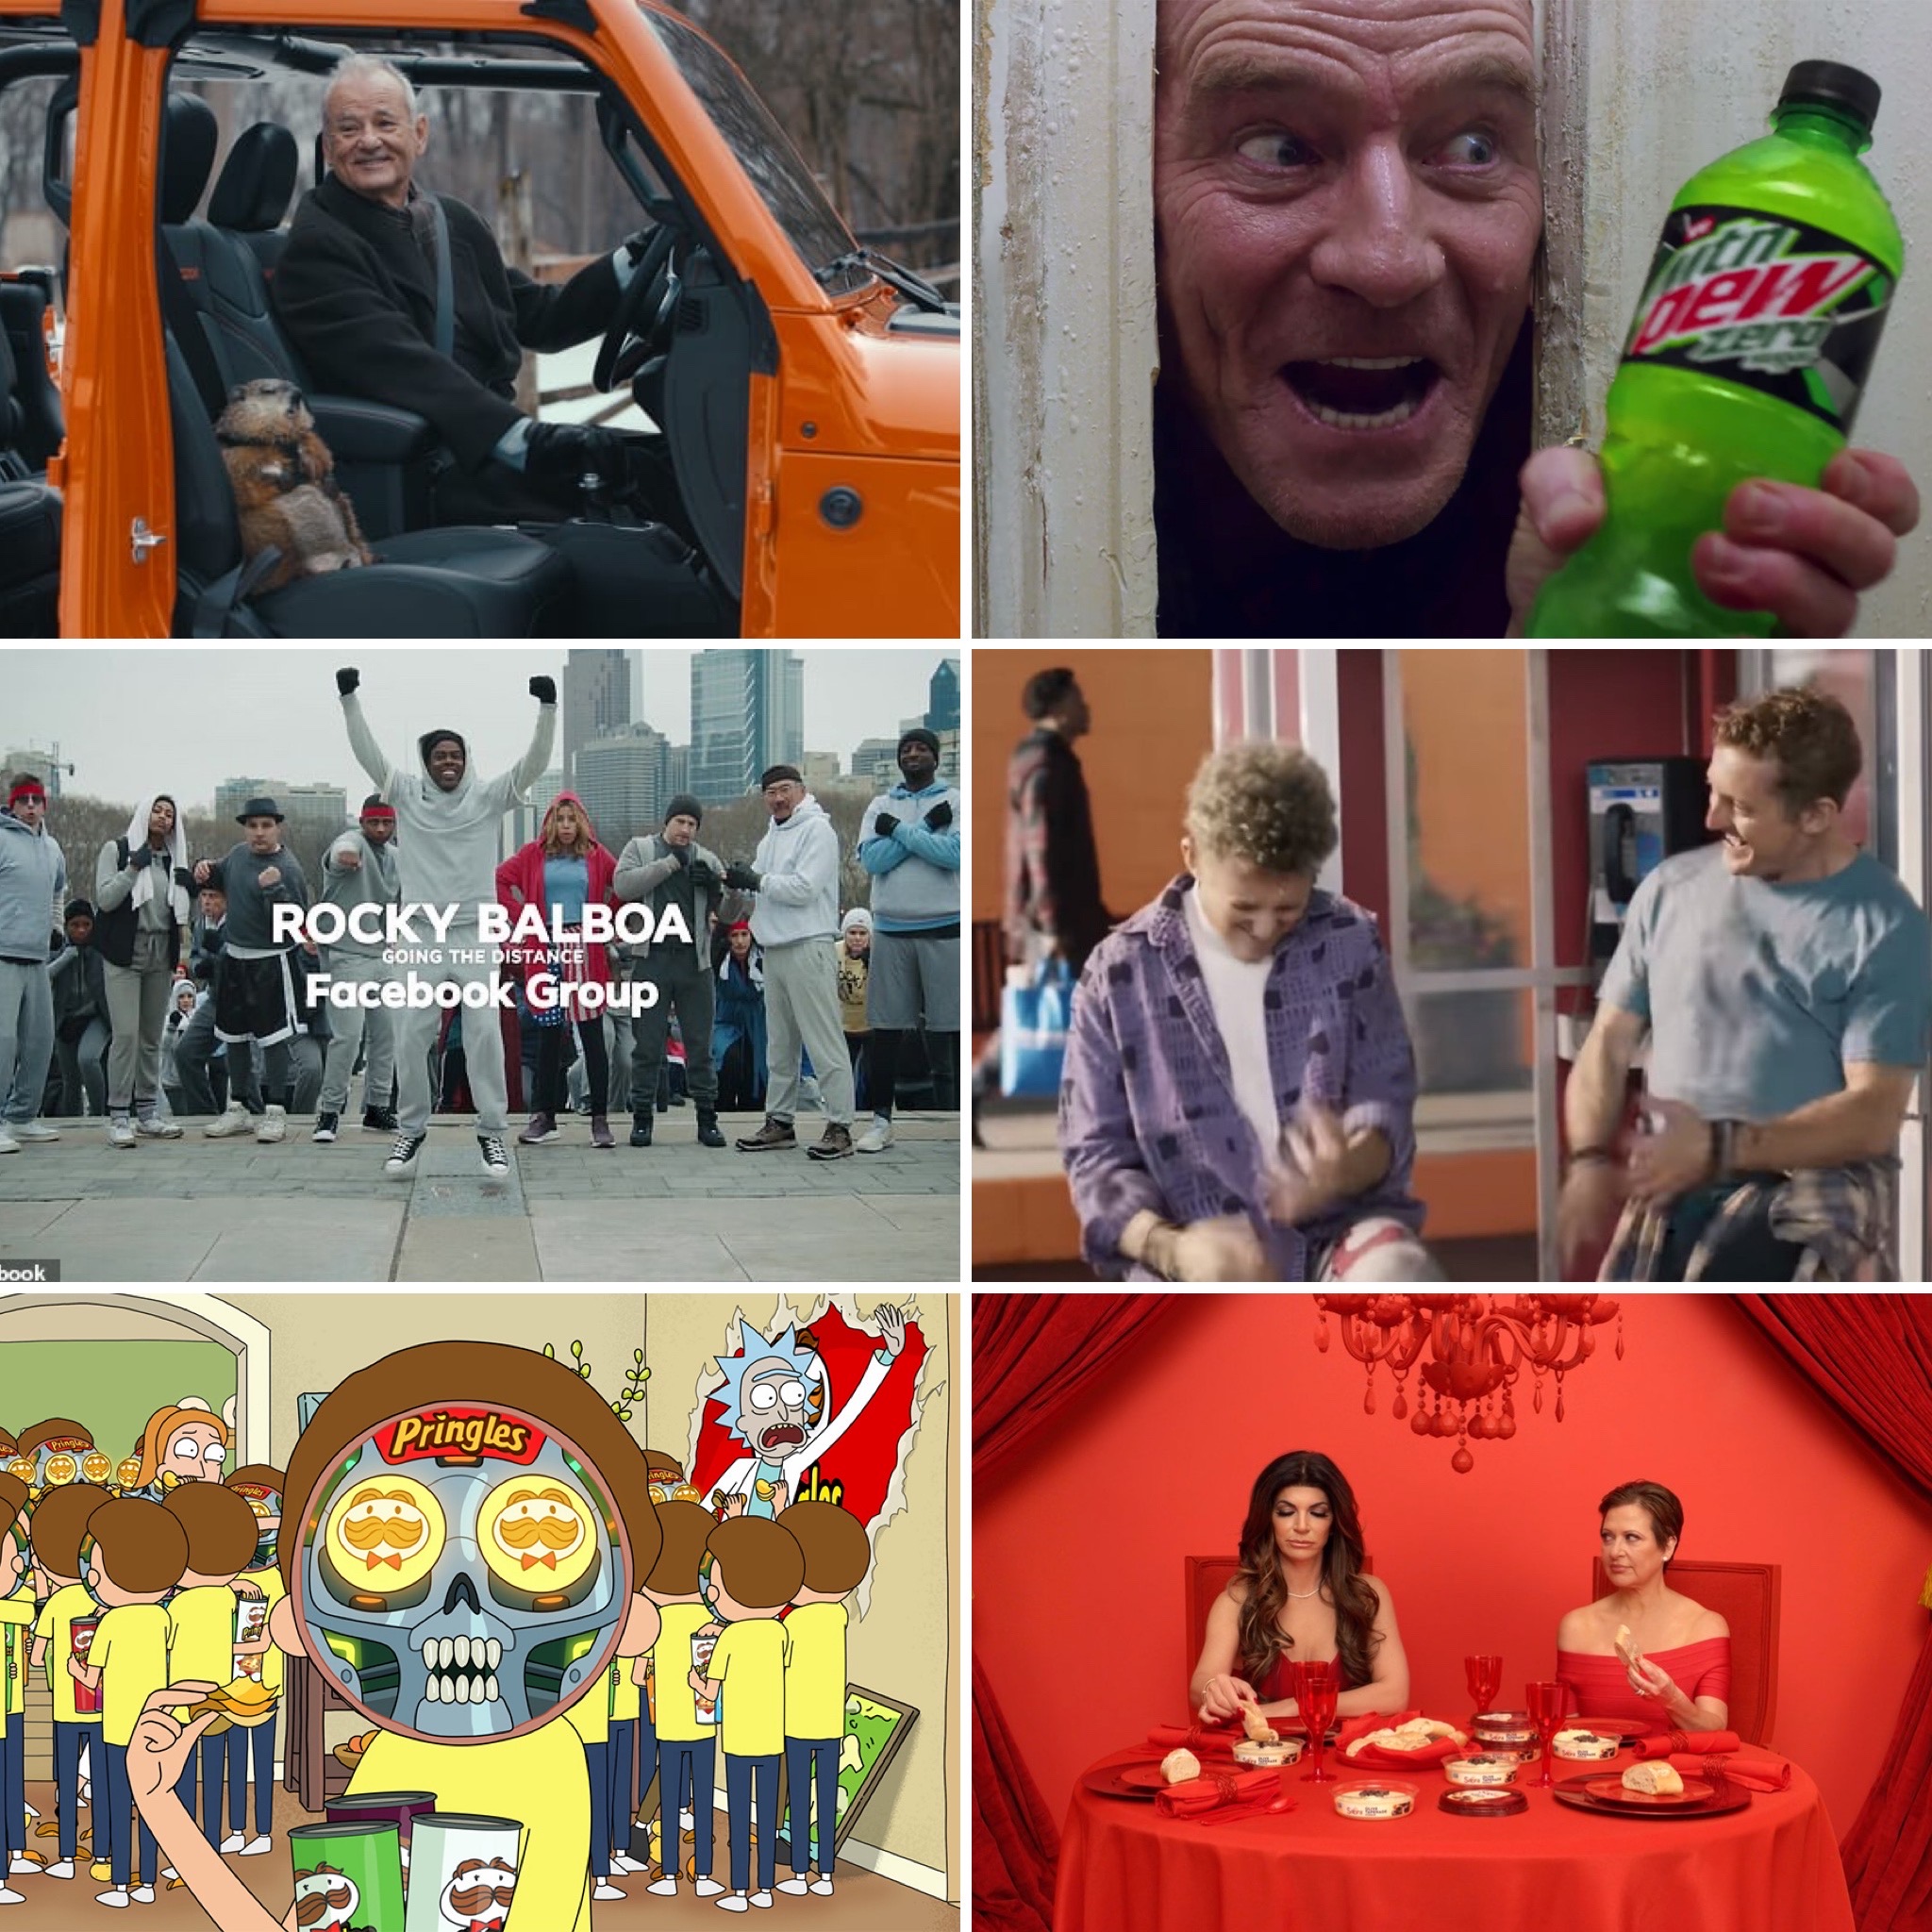 All the 2020 Super Bowl Ads Which Licensed Characters and Entertainment IP